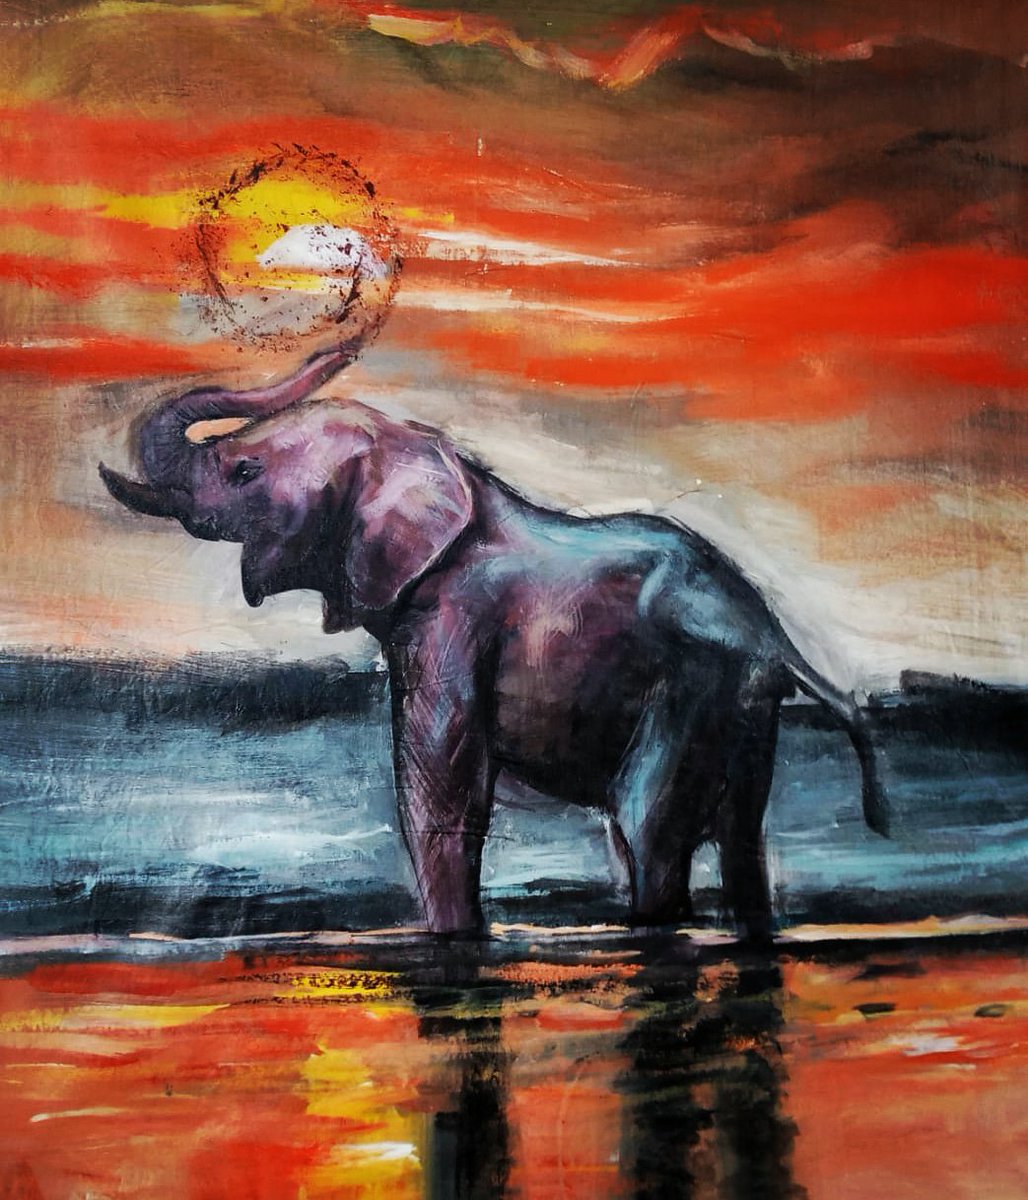 Life is but a dream.
Elseed art 
Acrylics painting on canvas 
80×60cm
Available for purchase. 
#little  #elephant #wildlifeplanet #africanbeauty #Elseedart